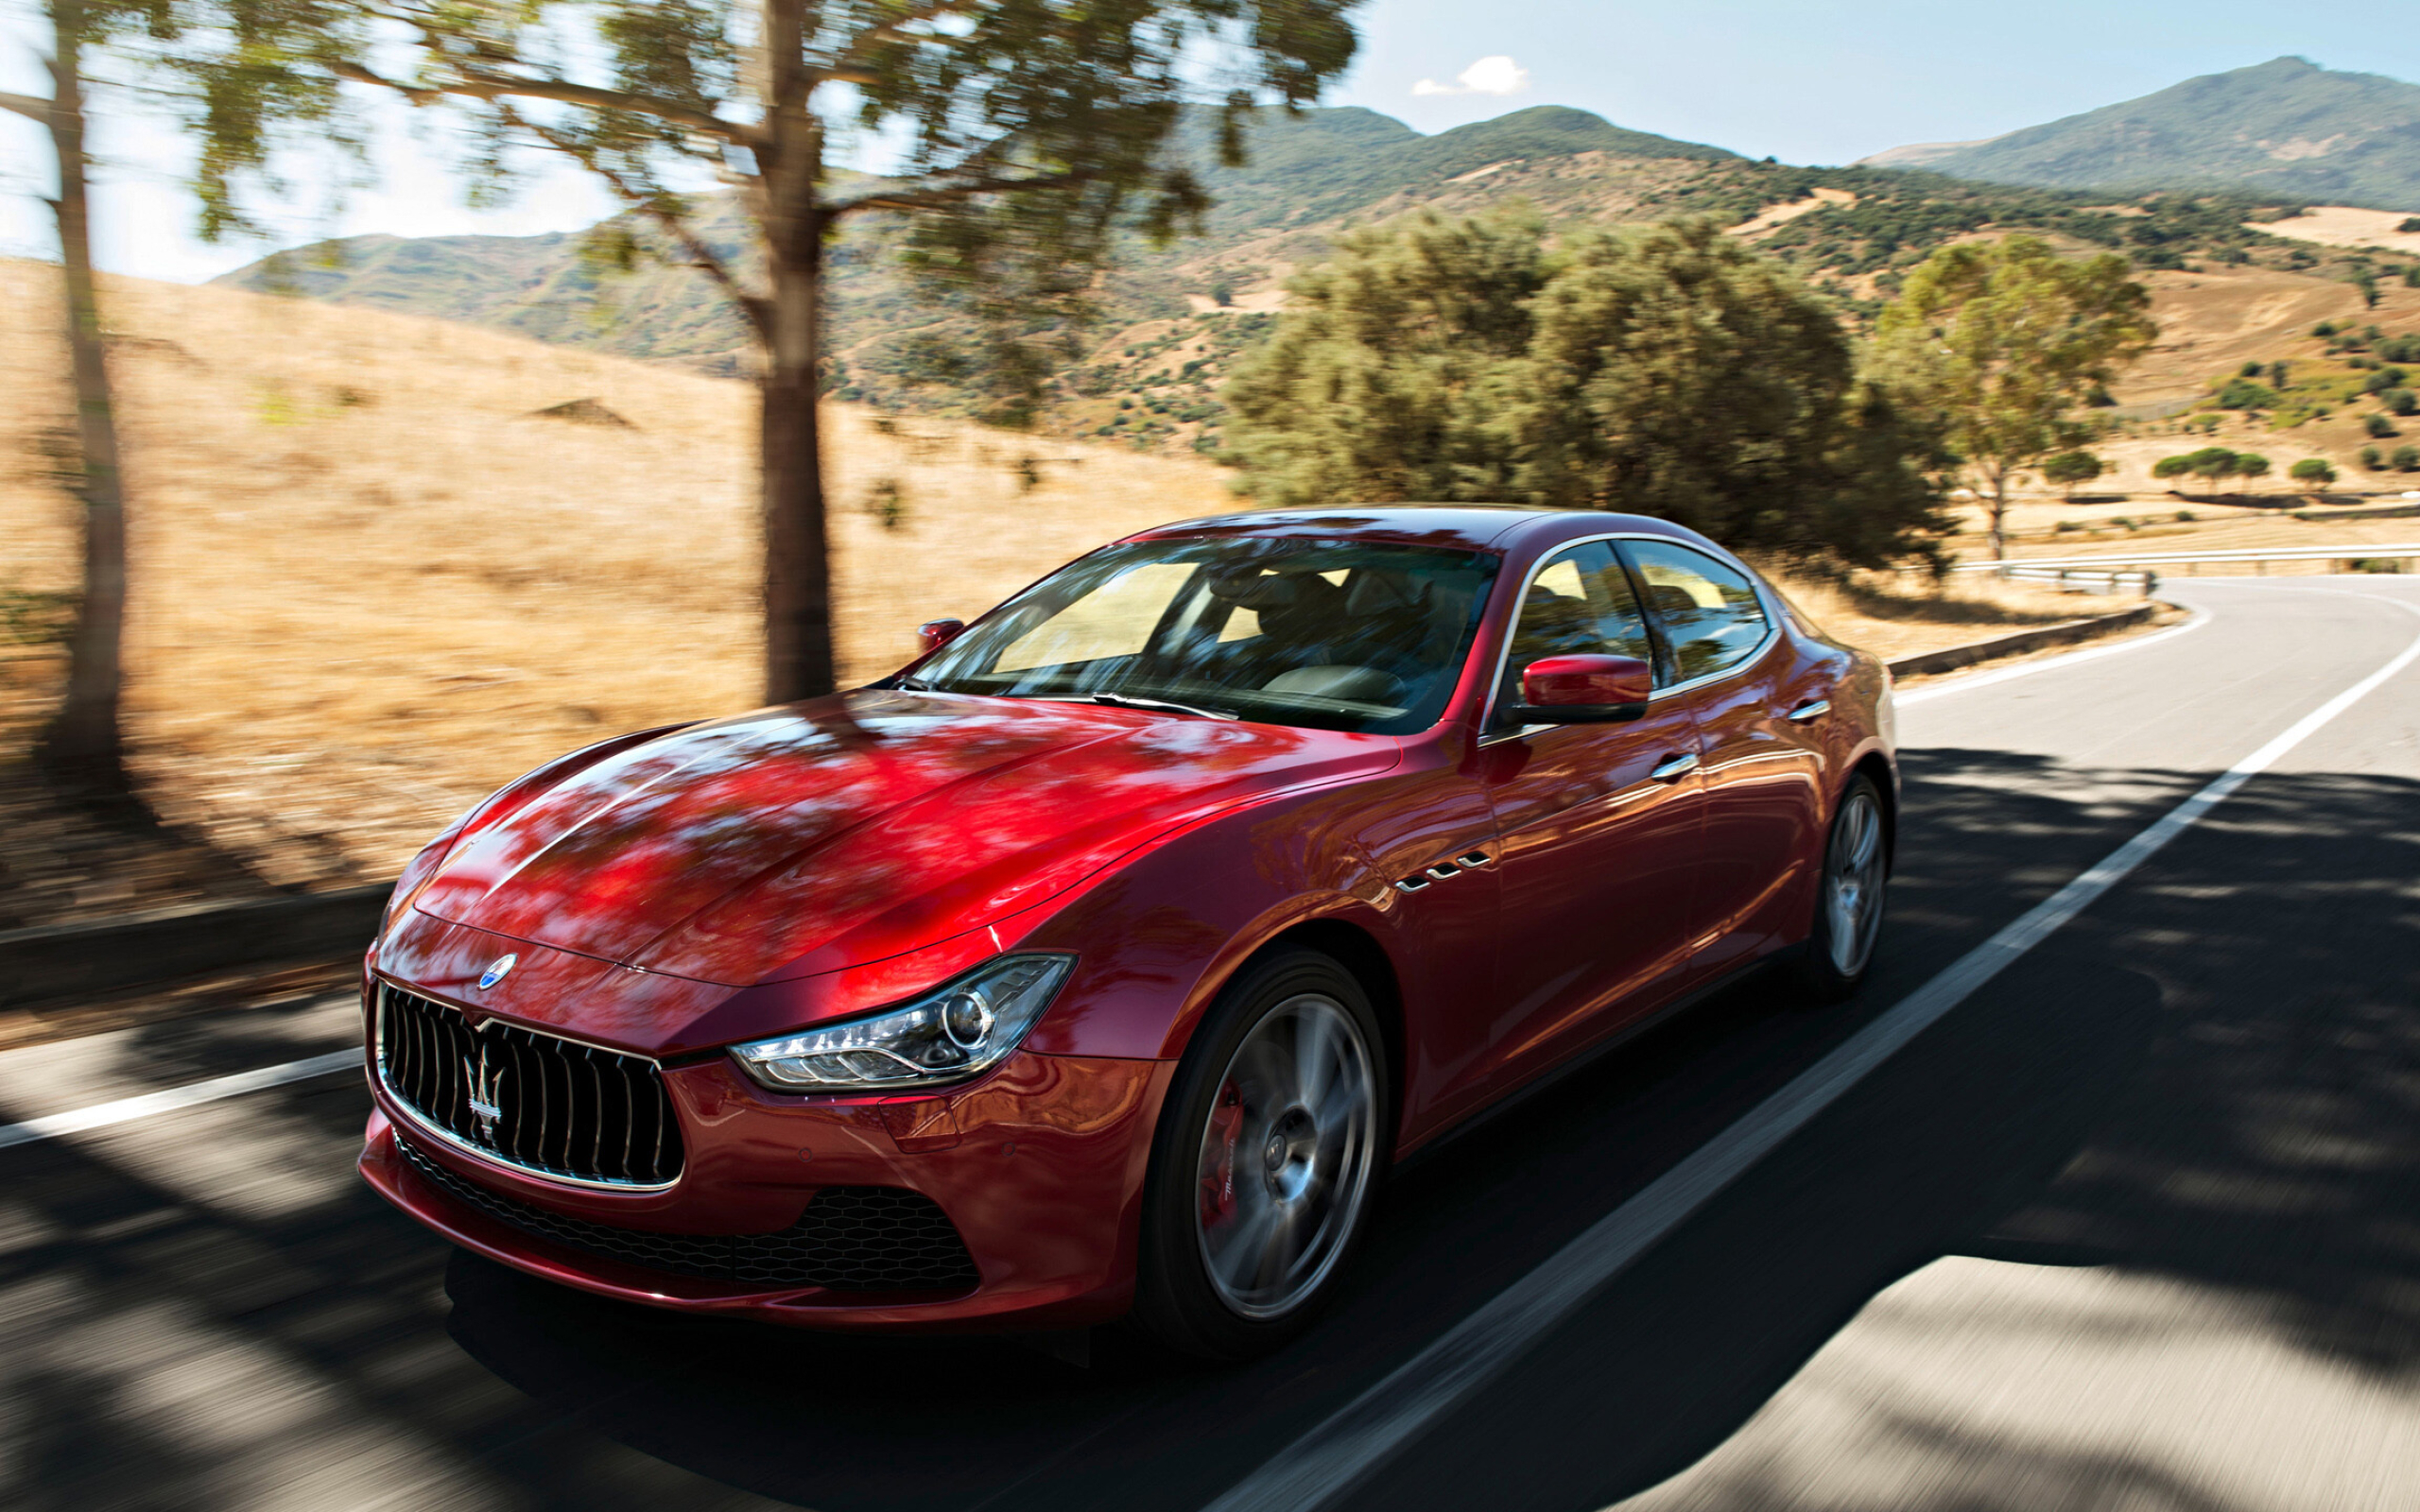 Maserati: The company's headquarters are now in Modena, and its emblem is a trident. 2560x1600 HD Background.